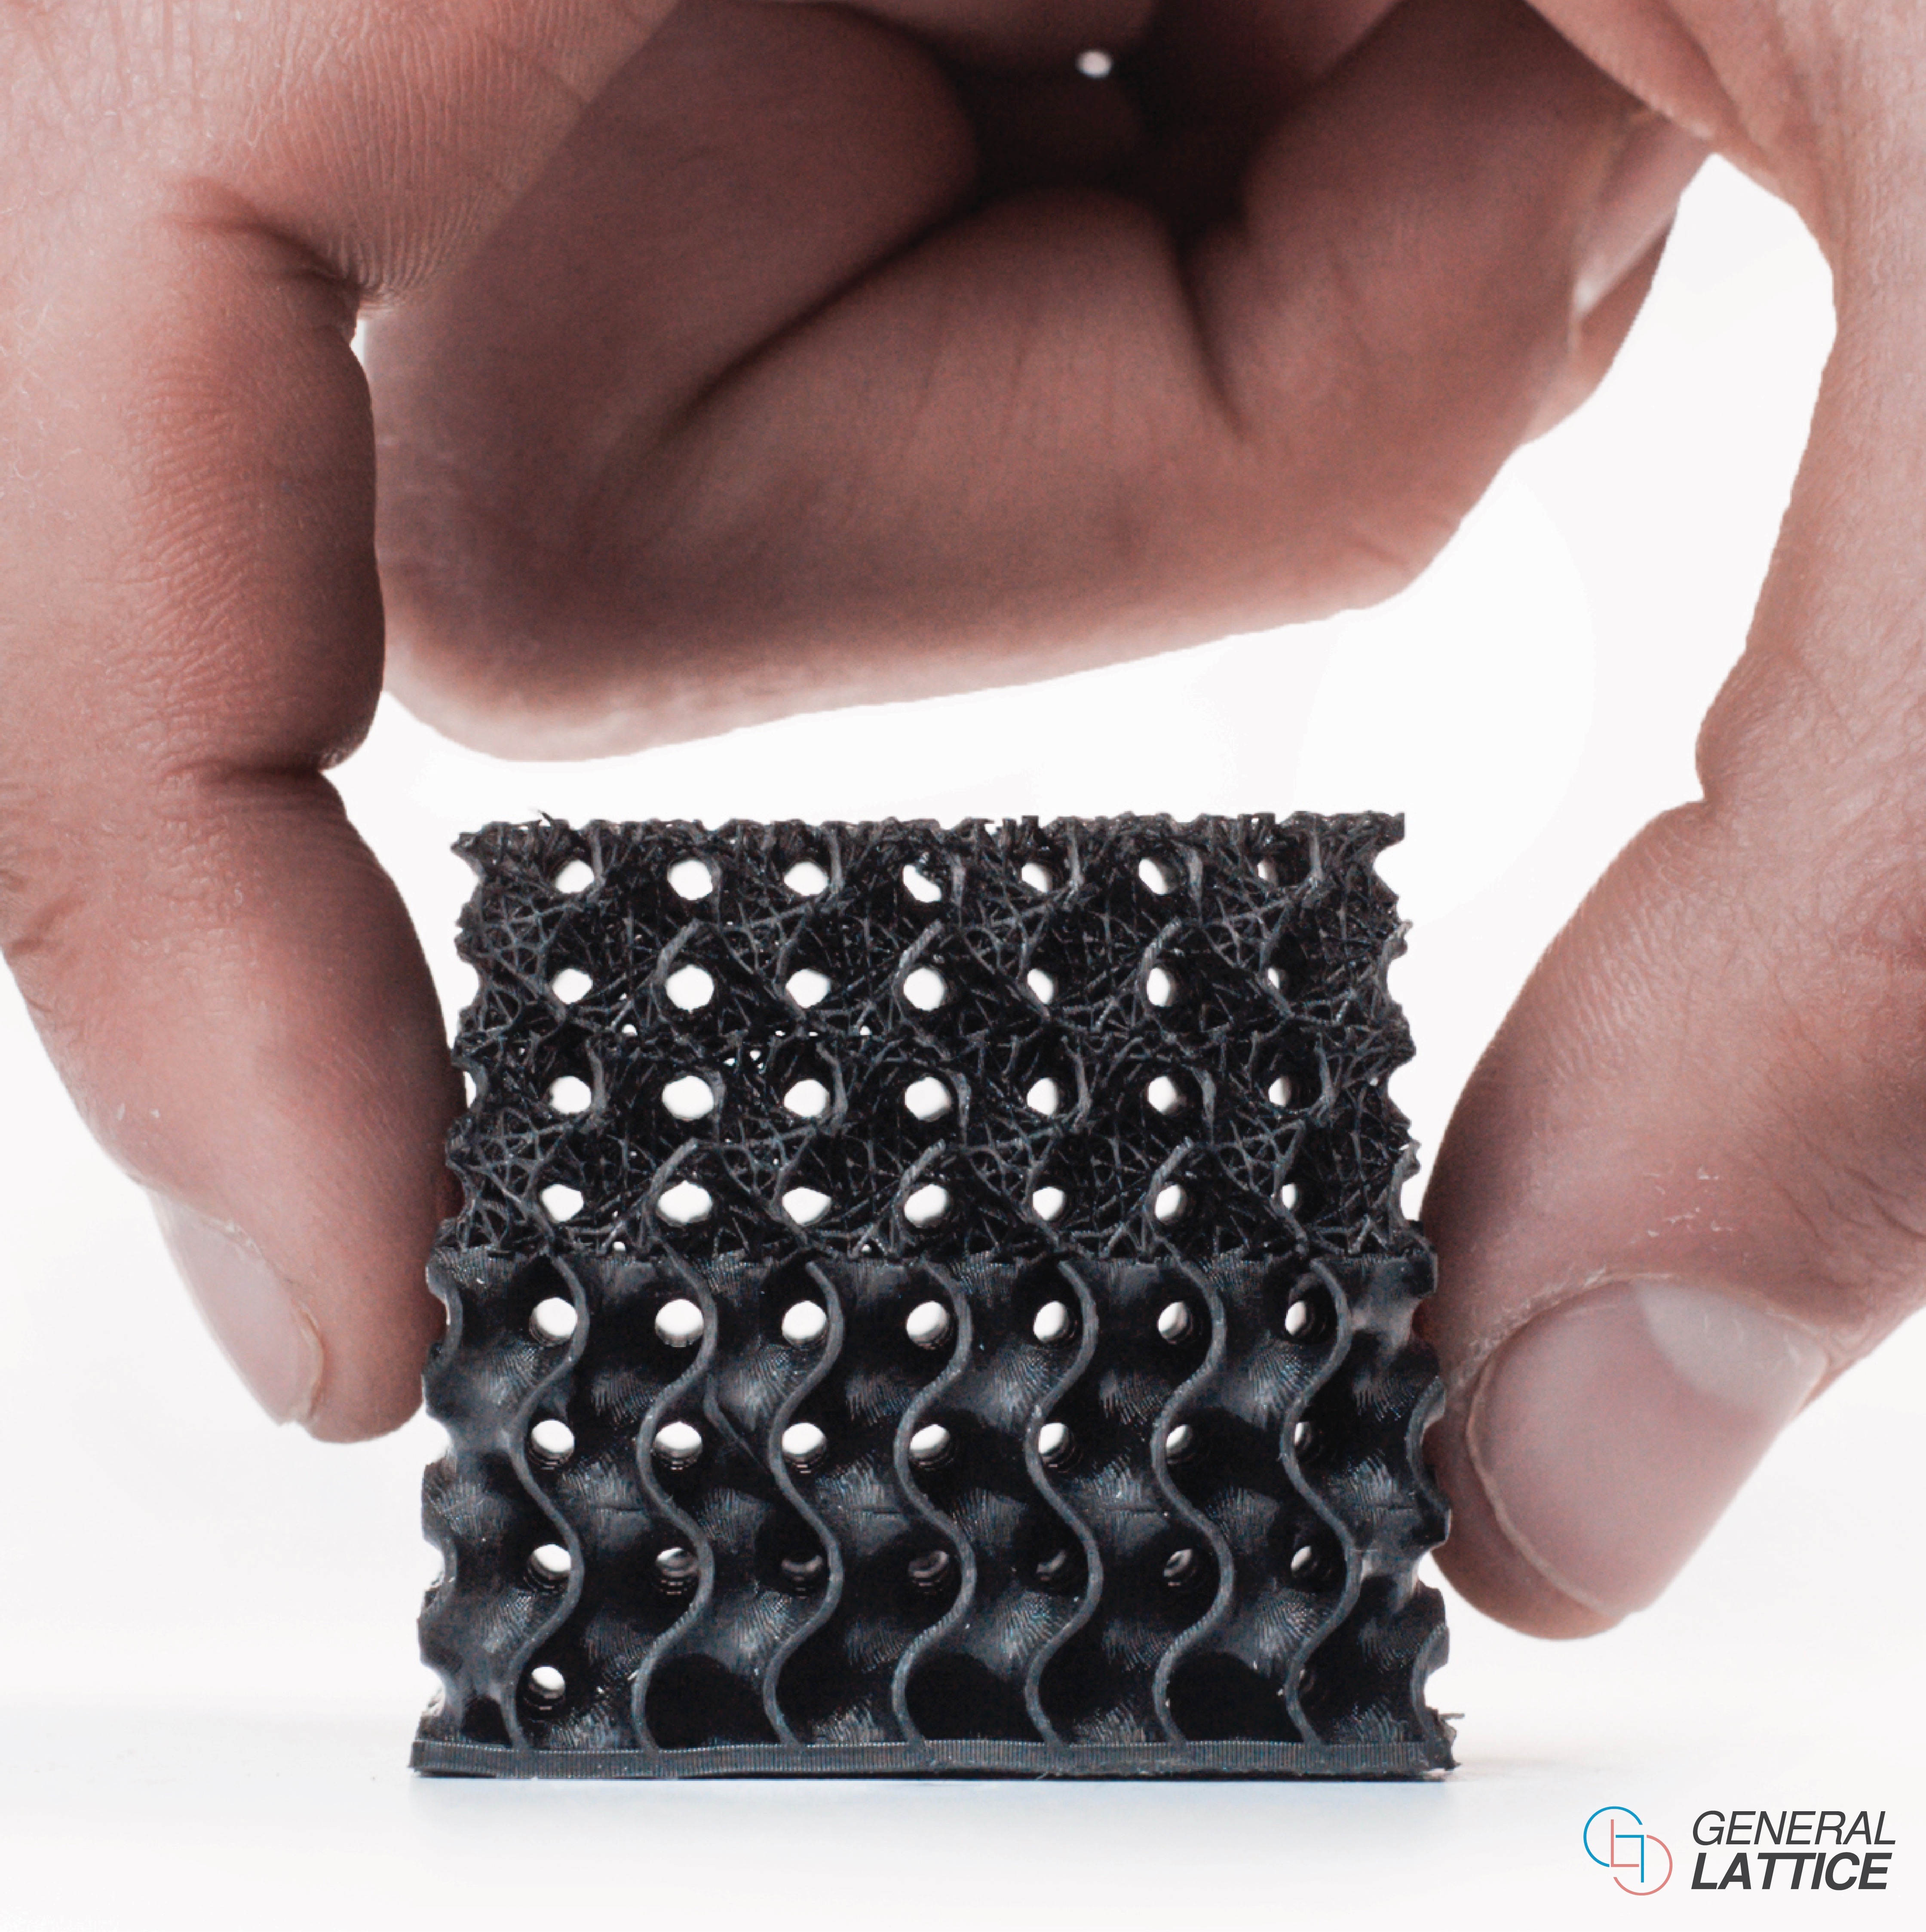 Graded 3D printed lattice created by General Lattice. Photo via General Lattice